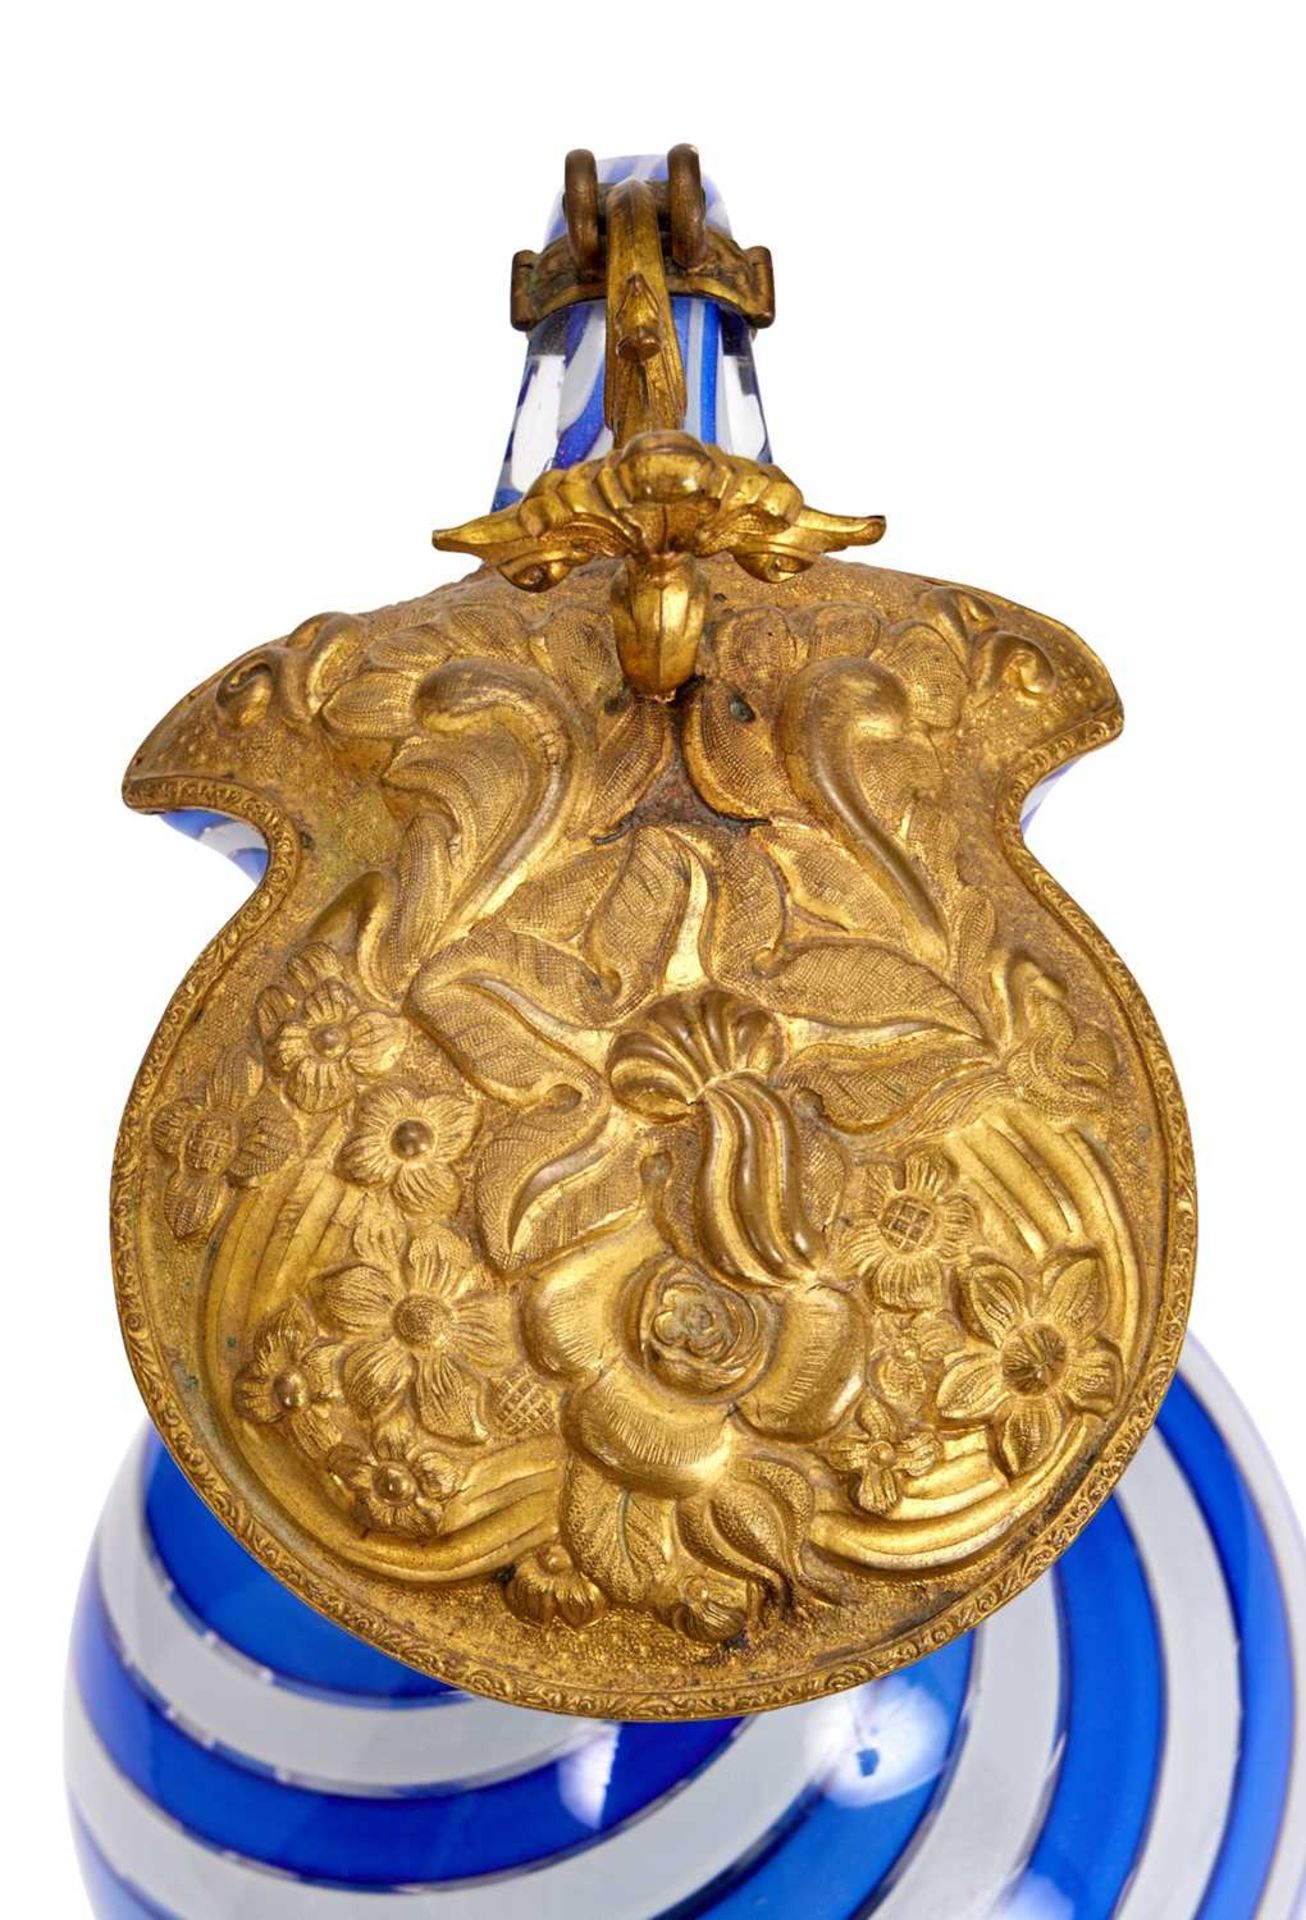 FOR THE PERSIAN / OTTOMAN MARKET : A LATE 19TH CENTURY FRENCH GLASS EWER - Image 2 of 12